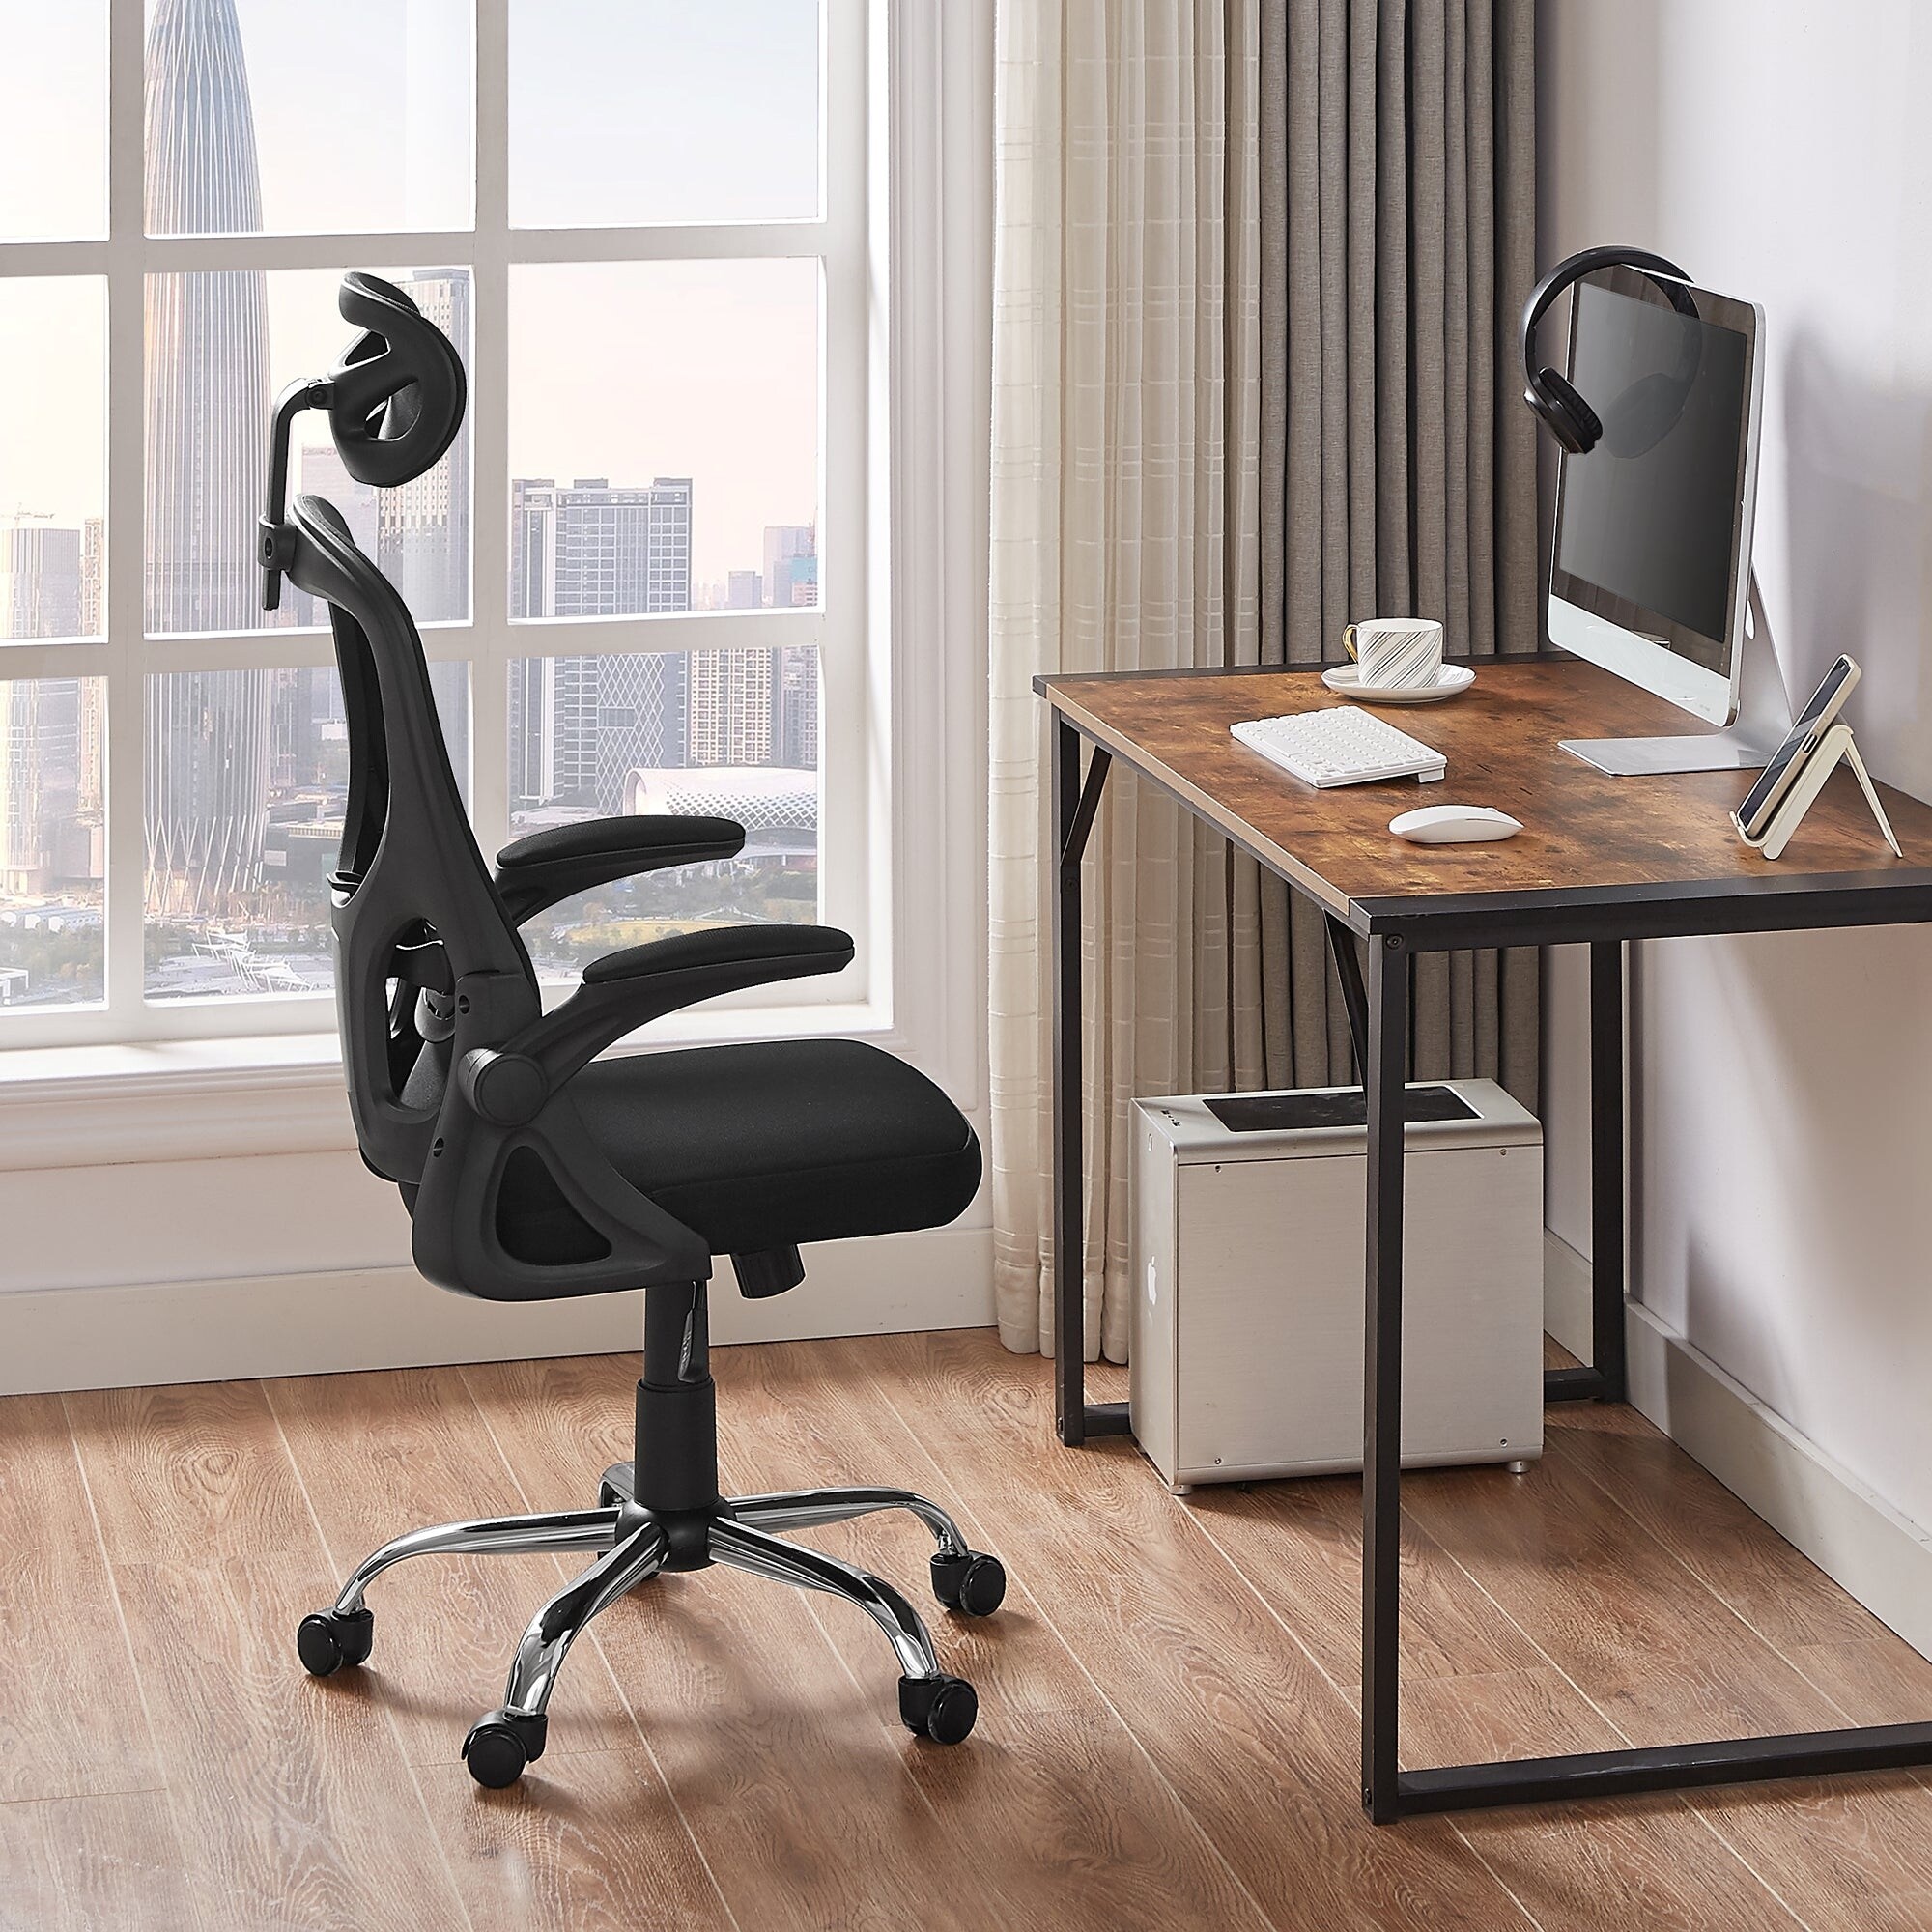 https://ak1.ostkcdn.com/images/products/is/images/direct/5dc1cde28a01213ae75ec0e098a595c3b99a1963/VECELO-High-Back-Ergonomic-Office-Chair-with-Adjustable-Headrest-Armrest-Mesh-Lumbar-Support.jpg